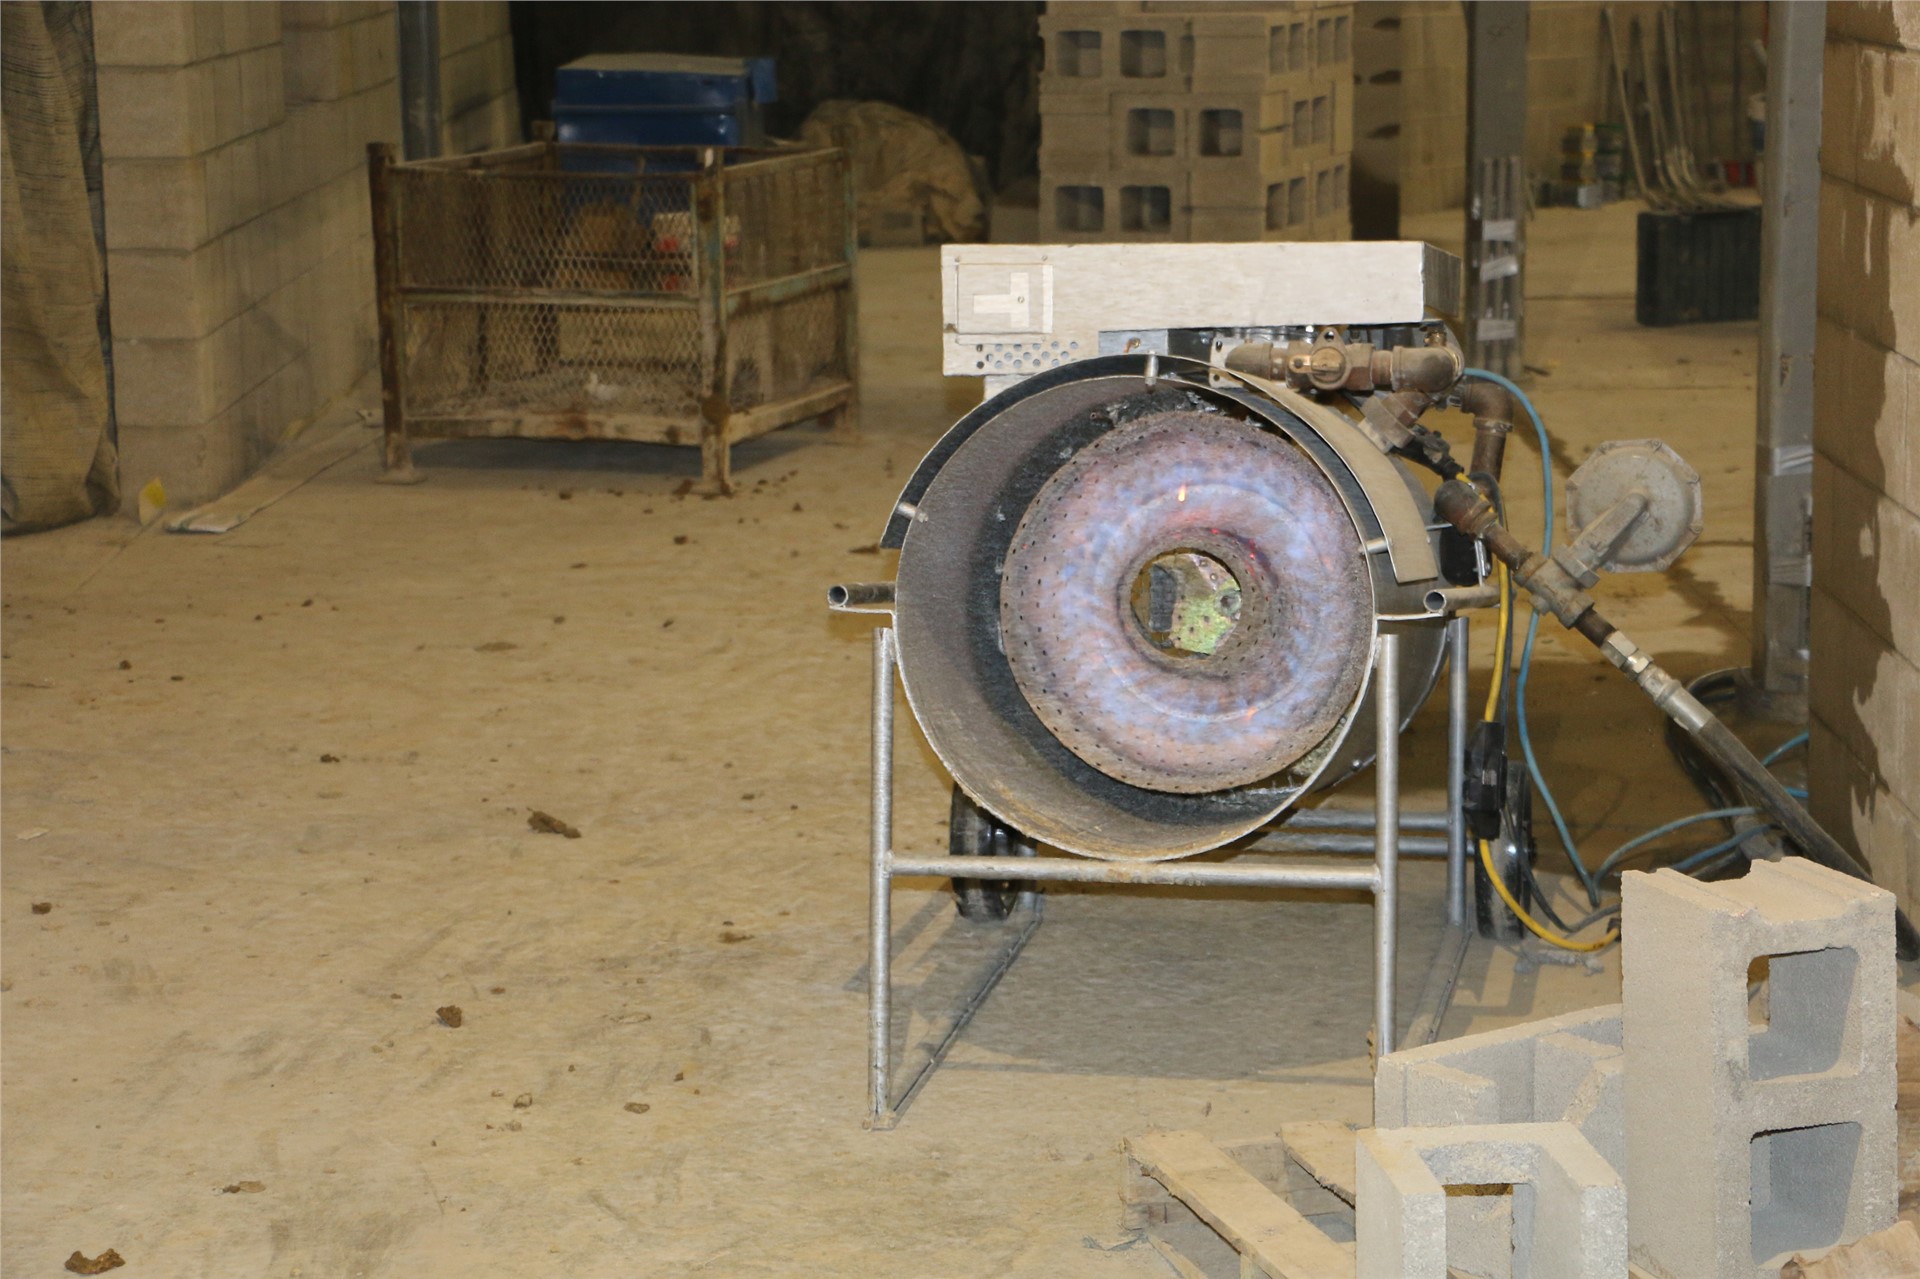 One of many heaters being used to warm up parts of the building for workers and materials to work 	i